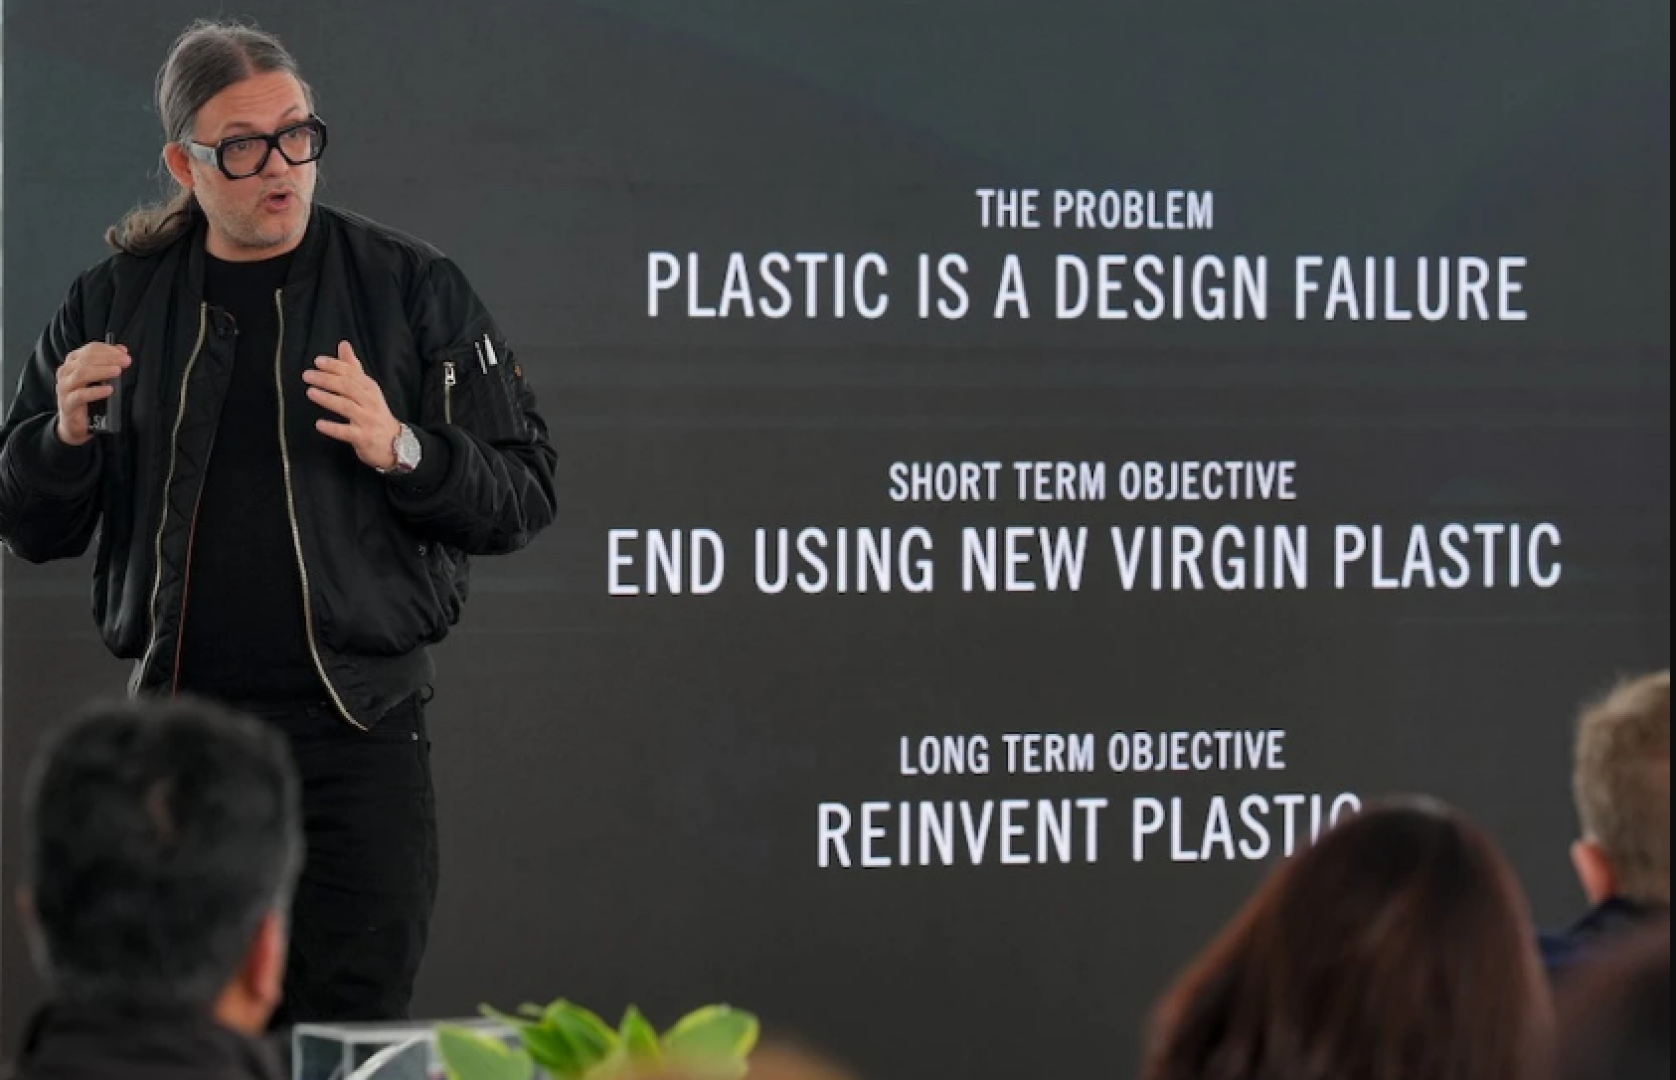 “Plastic doesn’t work. It is a design failure.'